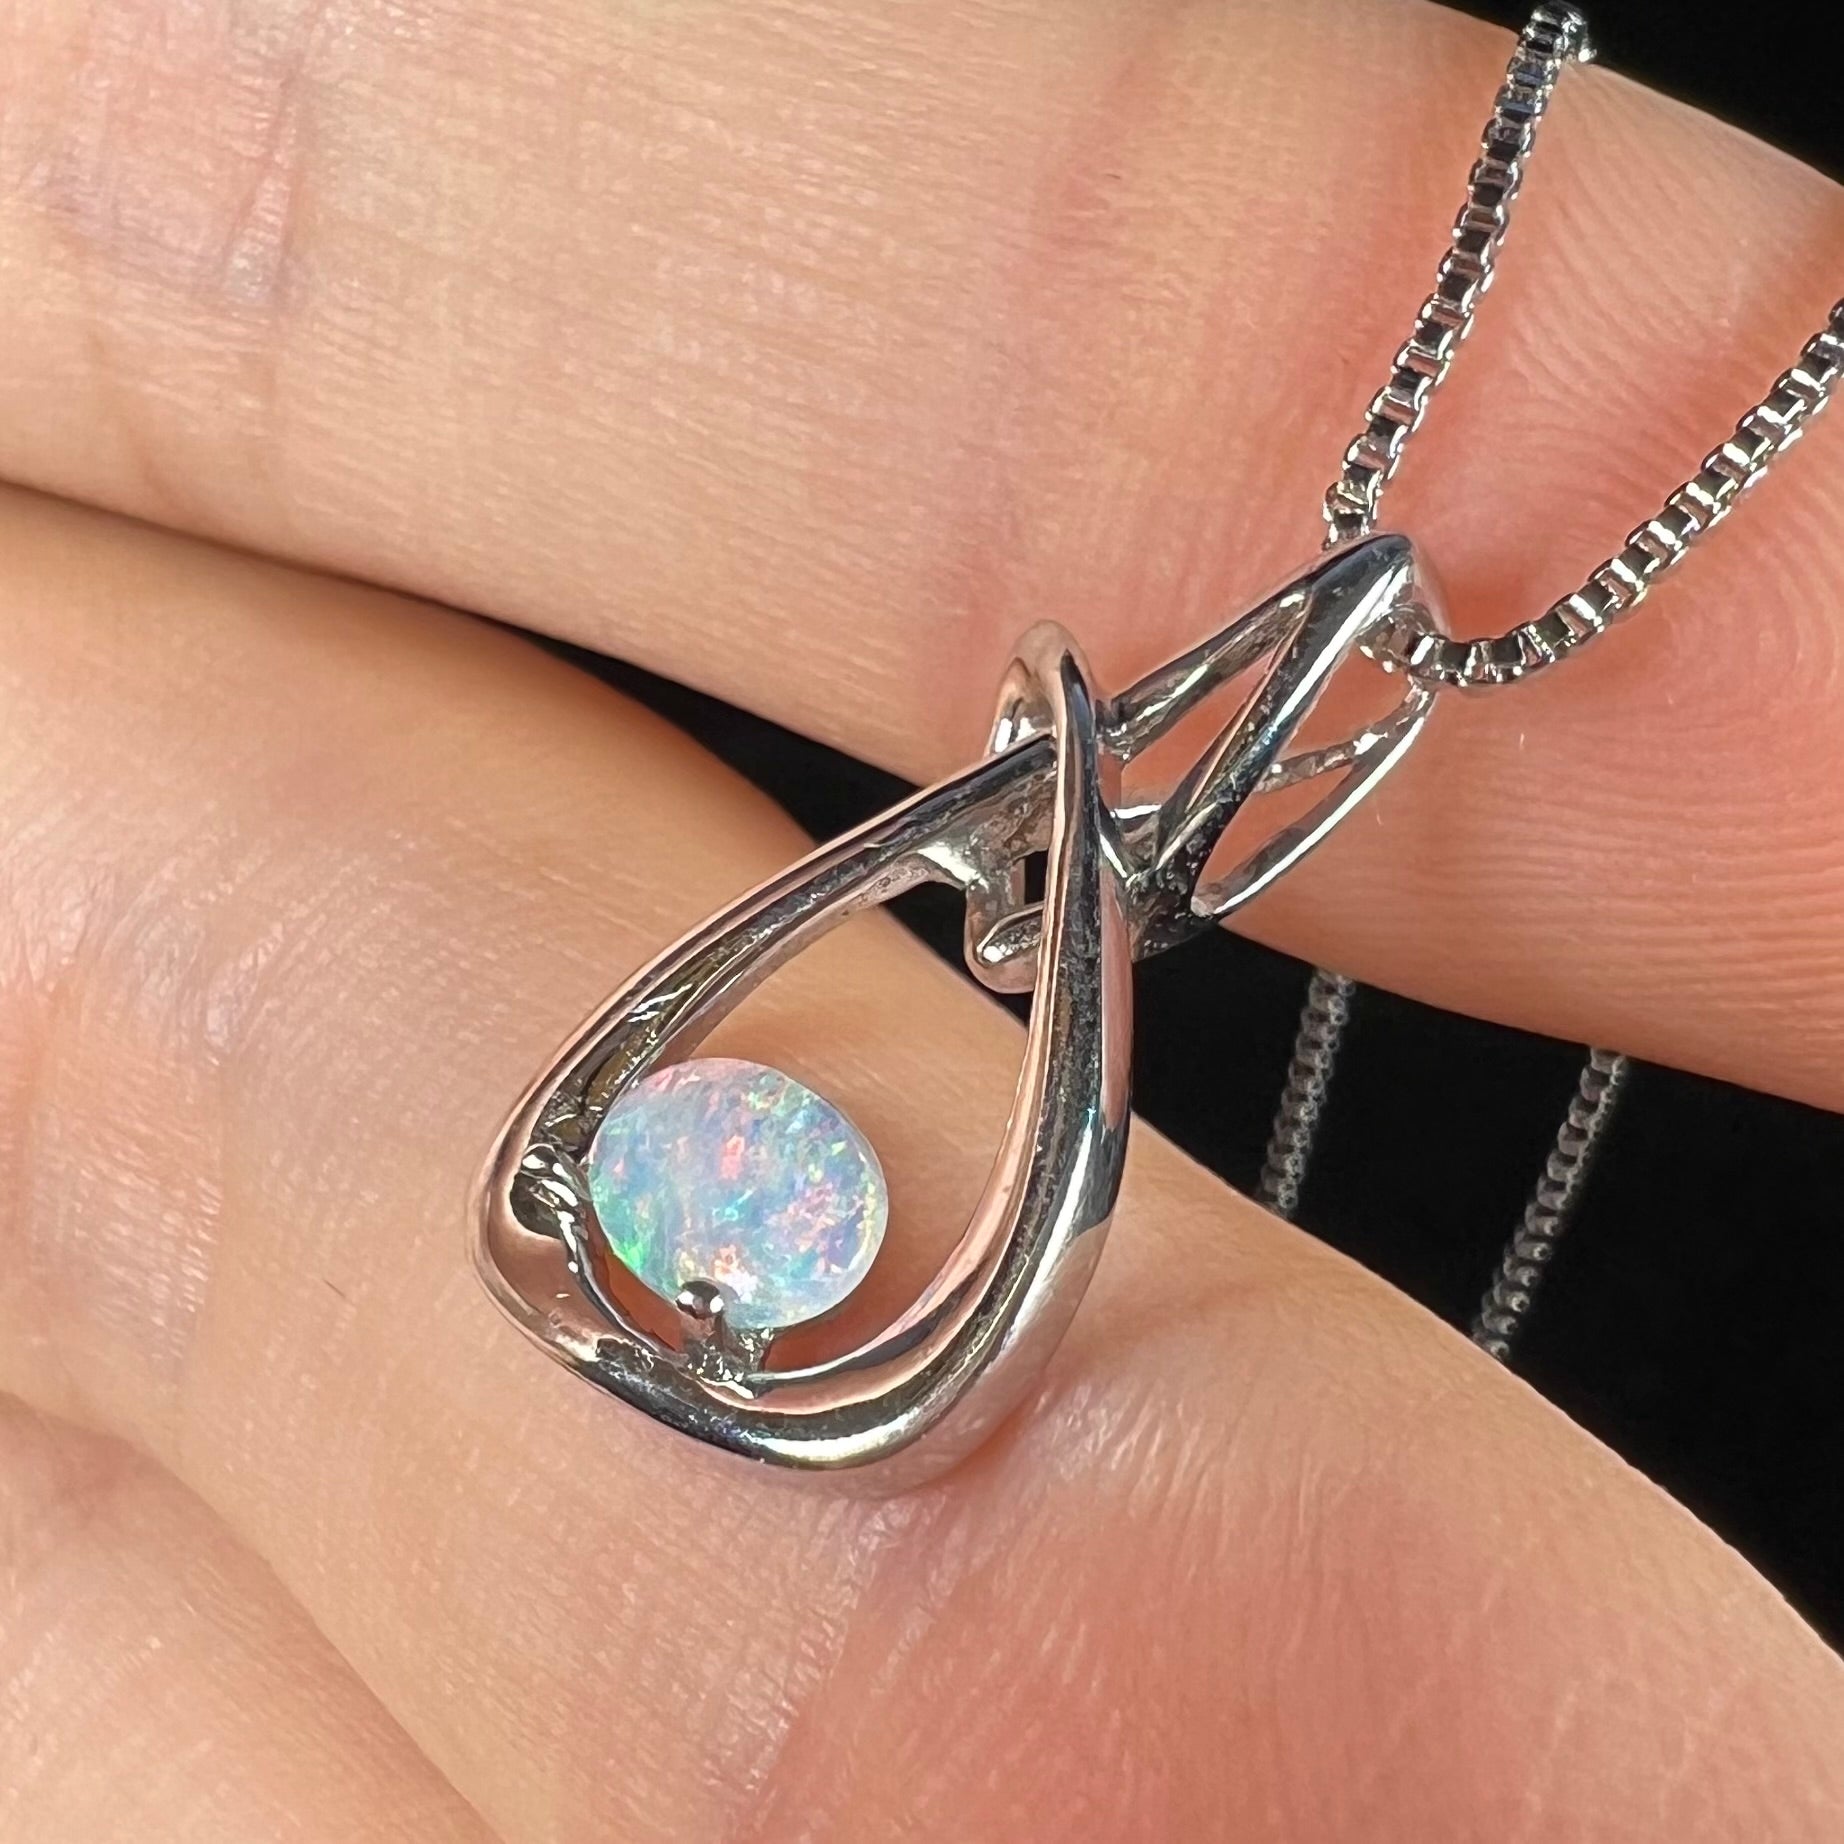 A ladies' sterling silver pendant set with an oval cabochon cut natural white crystal opal.